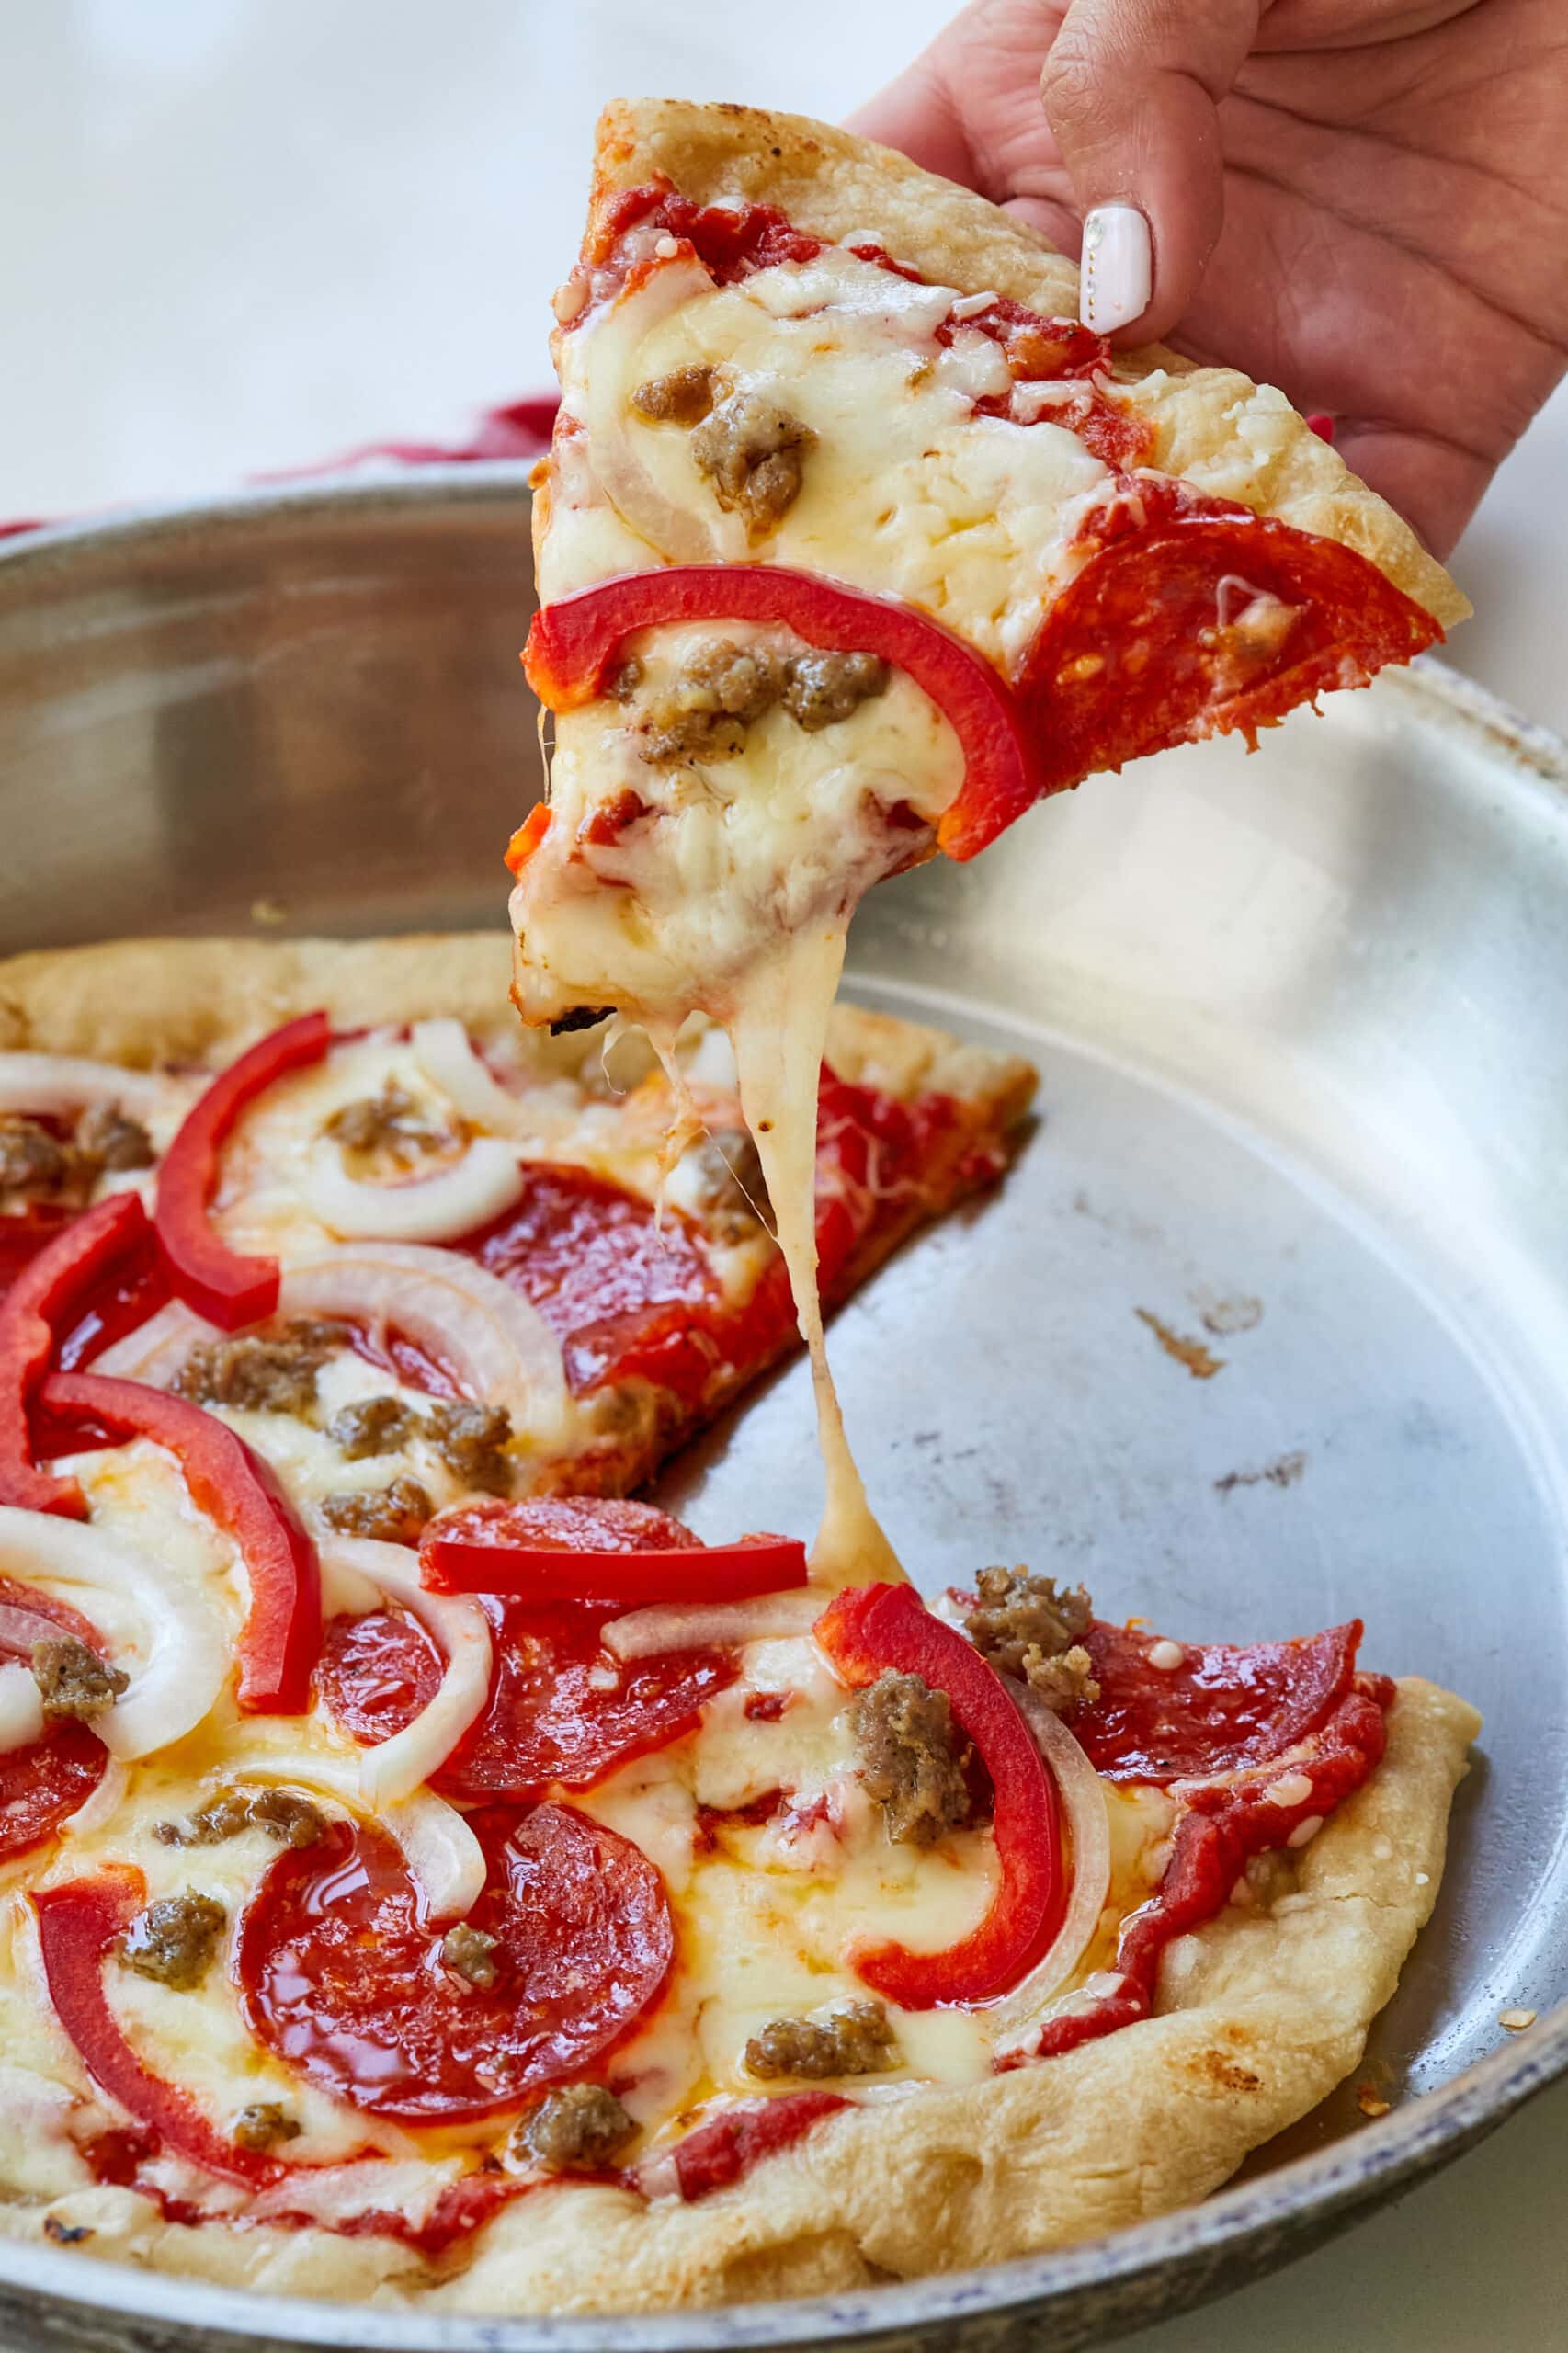 A slice of Pan-Fried Pizza is being lifted from the pan, with crispy edge, melted cheese, pepperoni and red bell paper strips.